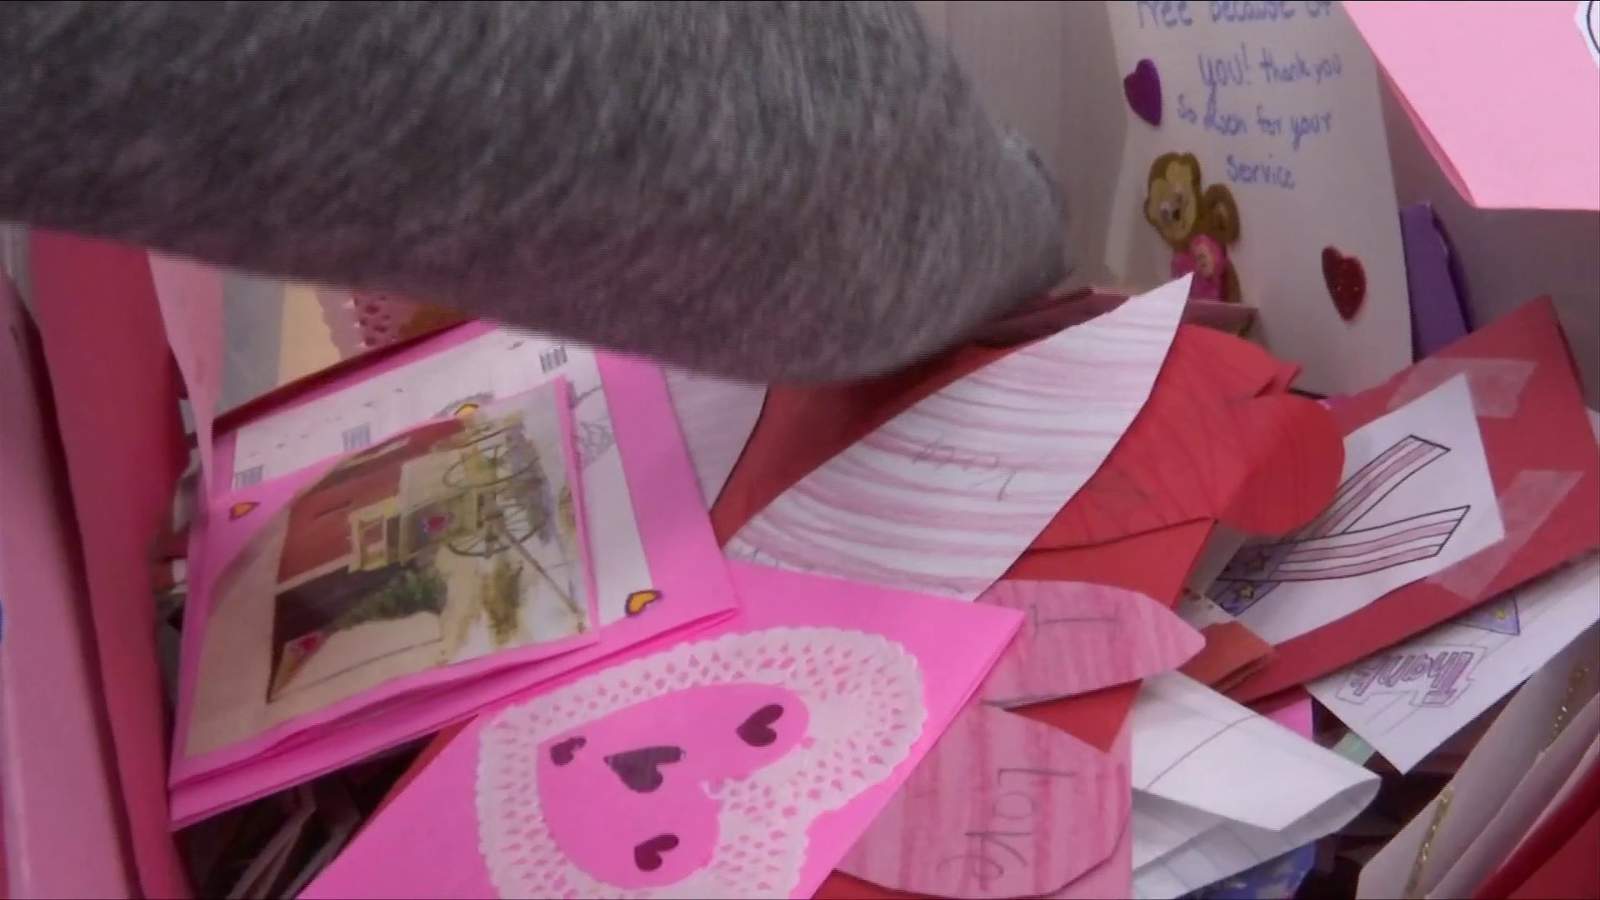 Valentines for Vets campaign receives overwhelming response